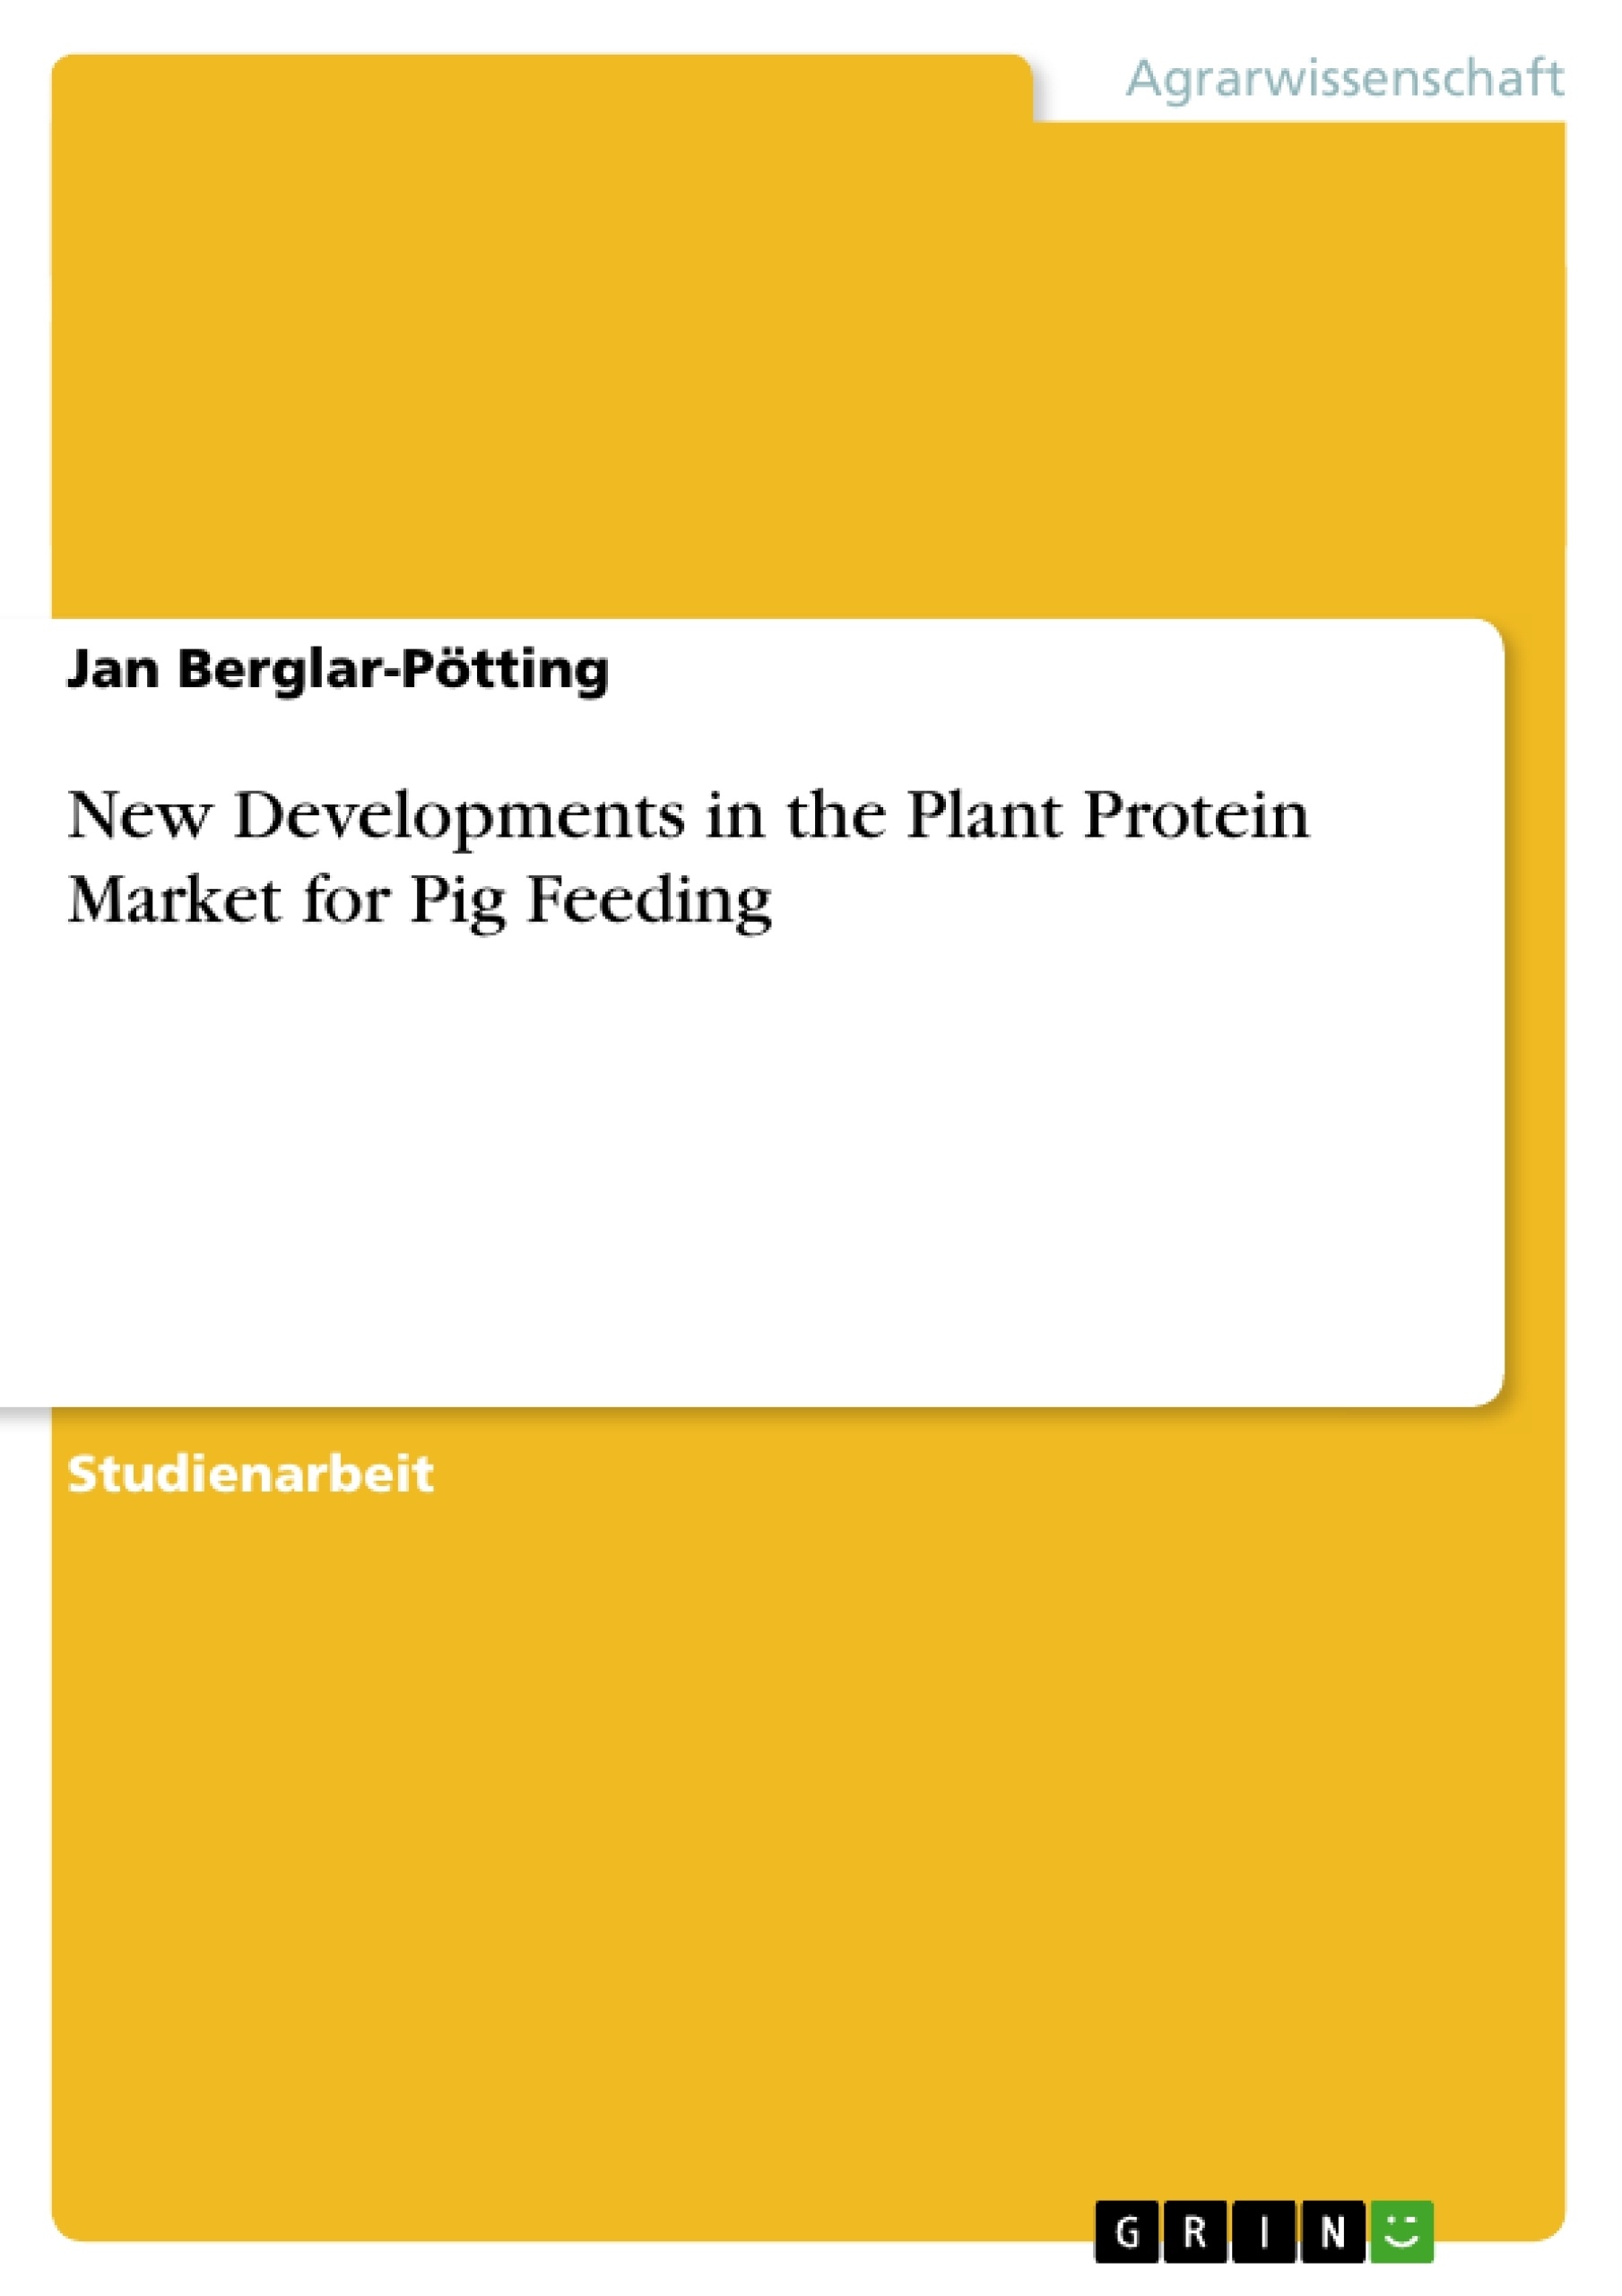 Título: New Developments in the Plant Protein Market for Pig Feeding